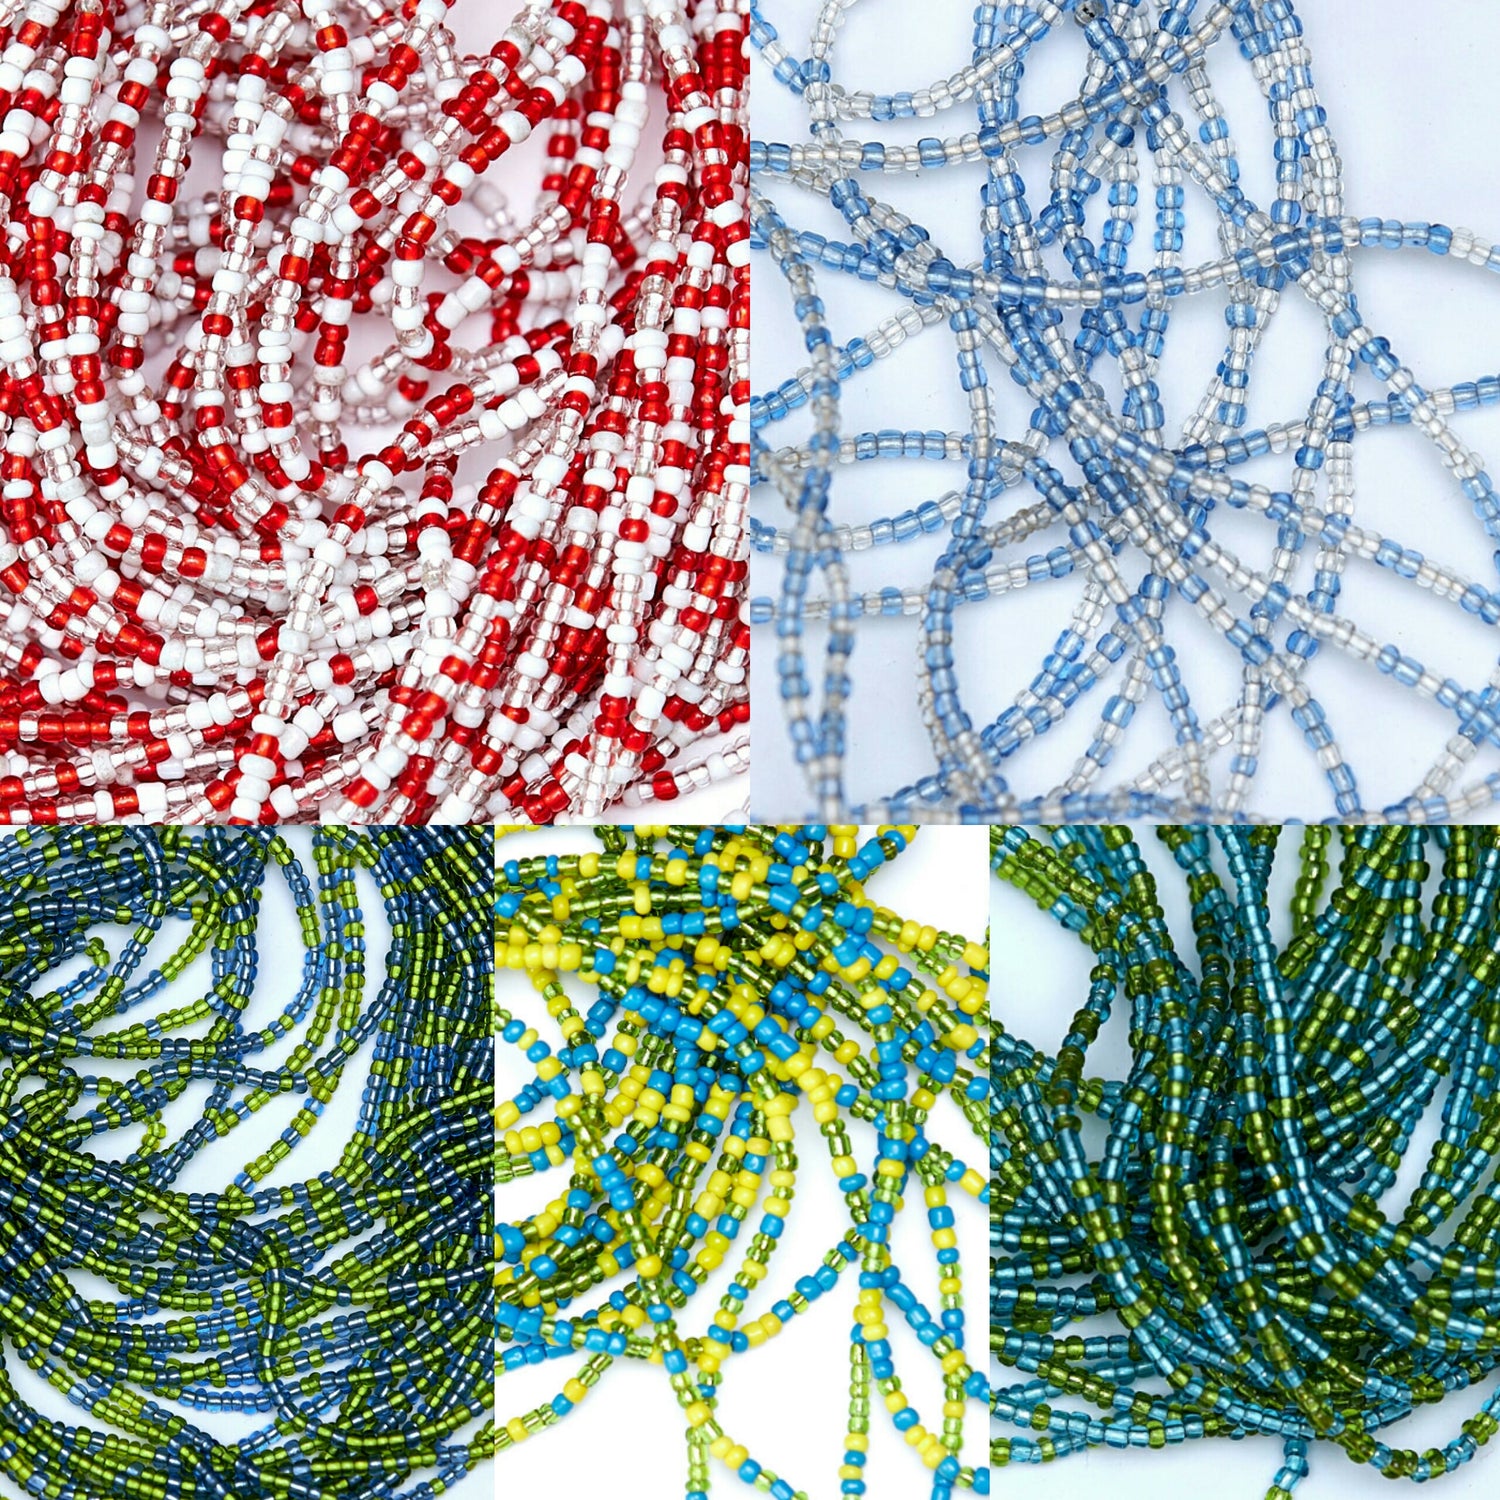 5 Pictures of different Colors of waist beads including 40 Inches Sea Blue And Green Tie on Waist Beads, 40 Inches Light Blue And Green Tie on Waist Beads, 40 Inches Blue and Clear Crystal Tie On Waist Beads, 40 Inches Red And White Tie on Waist Beads, and 44 Inches Yellow And Blue Tie on Waist Beads.